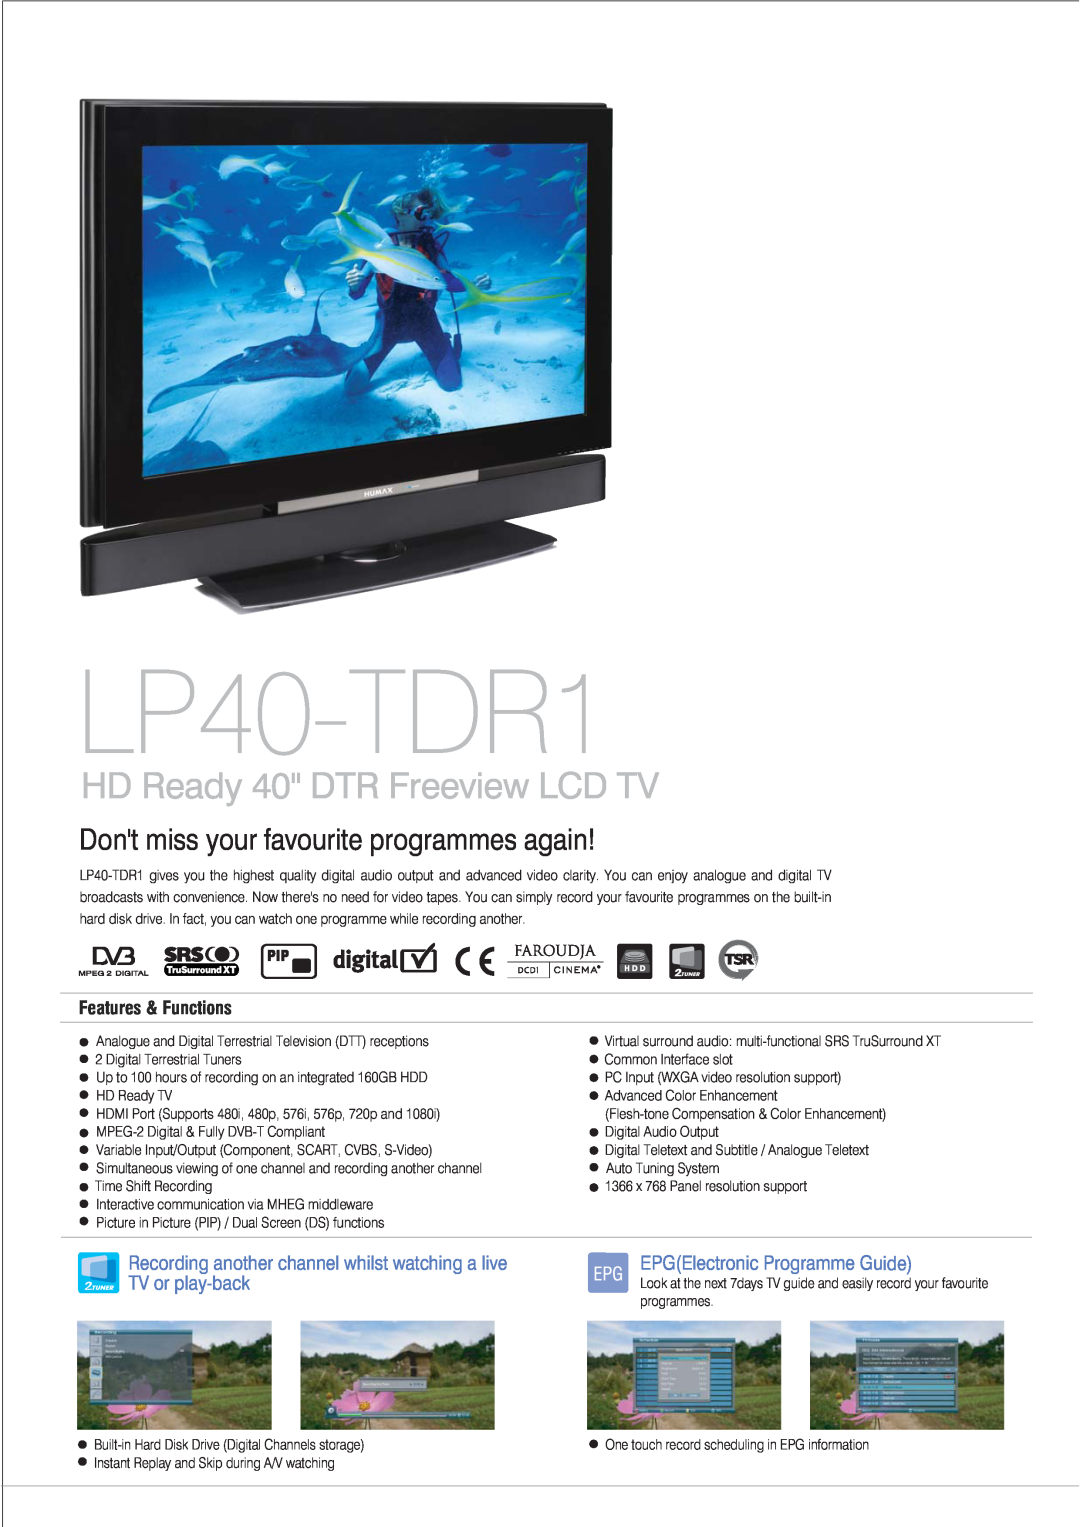 Humax LP40-TDR1 manual Recording another channel whilst watching a live TV or play-back, HD Ready 40 DTR Freeview LCD TV 